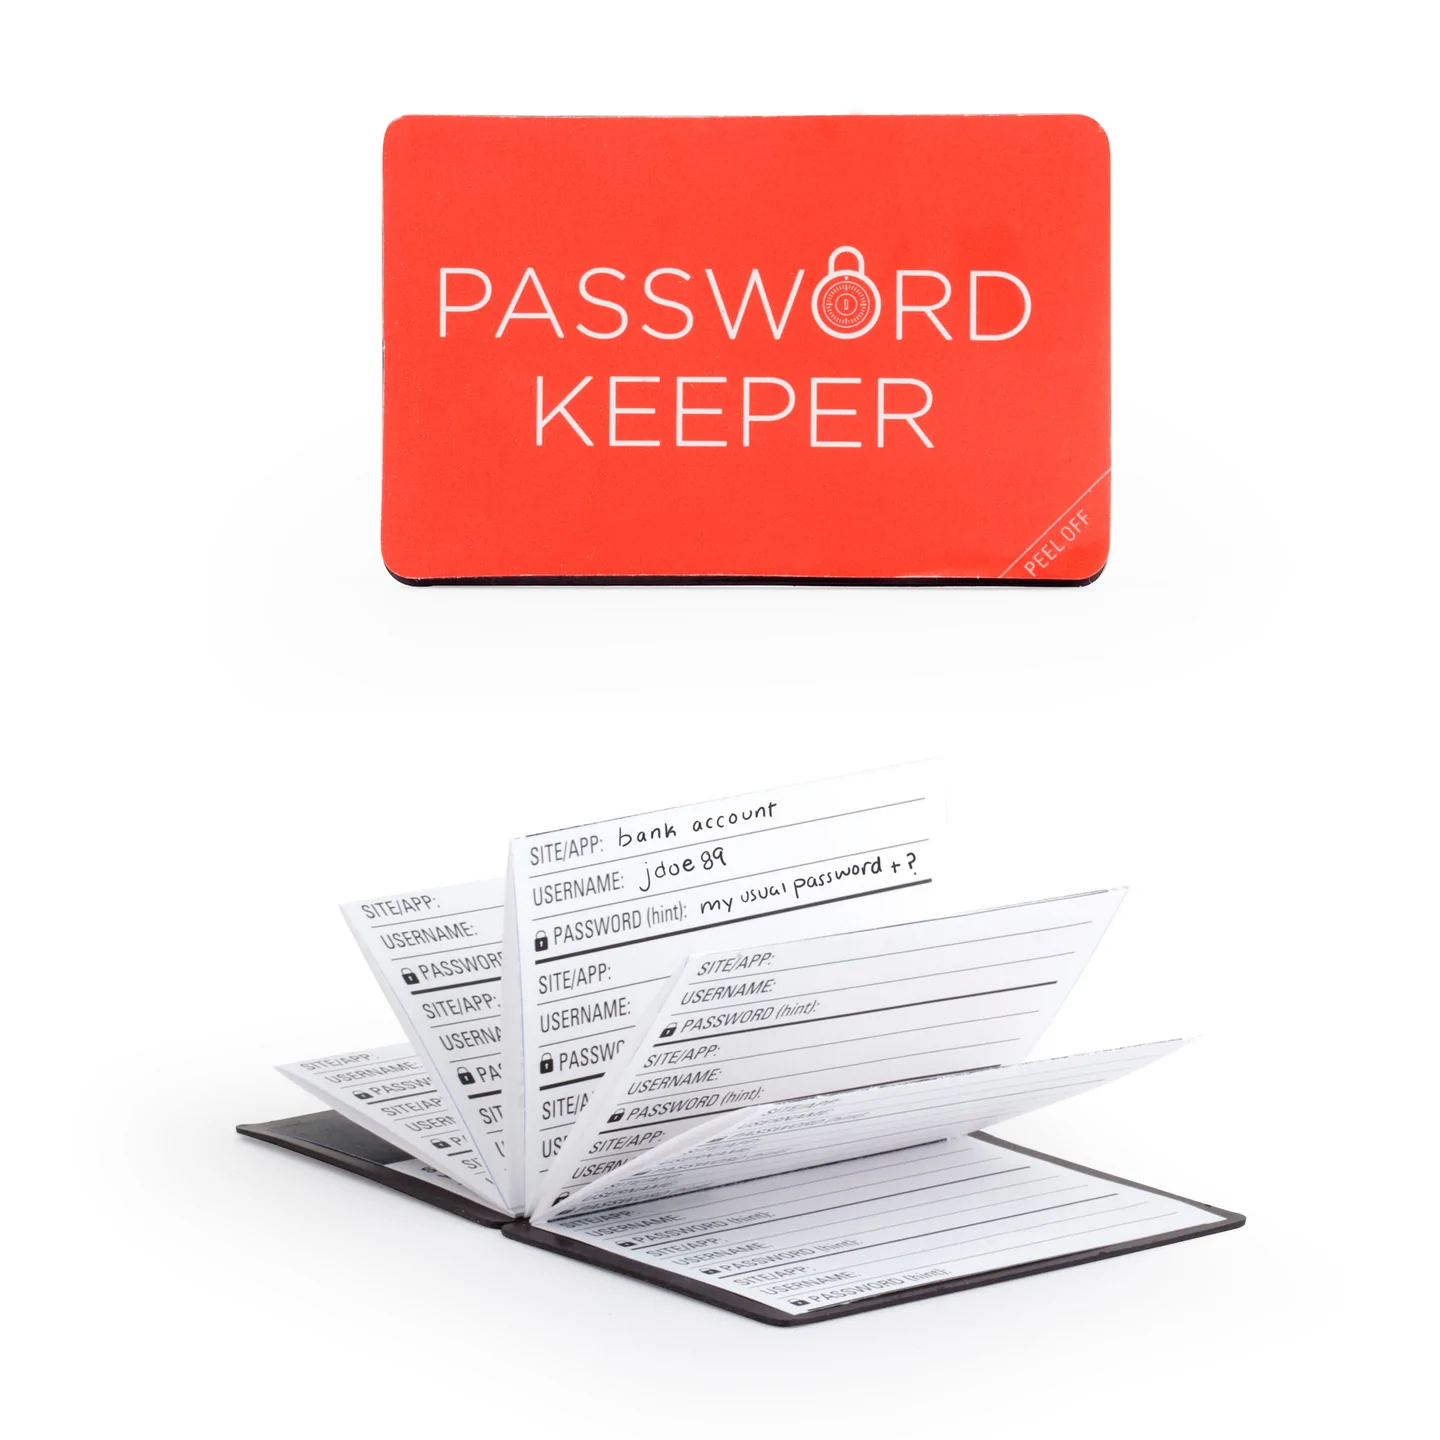 password keeper book by Kikkerland